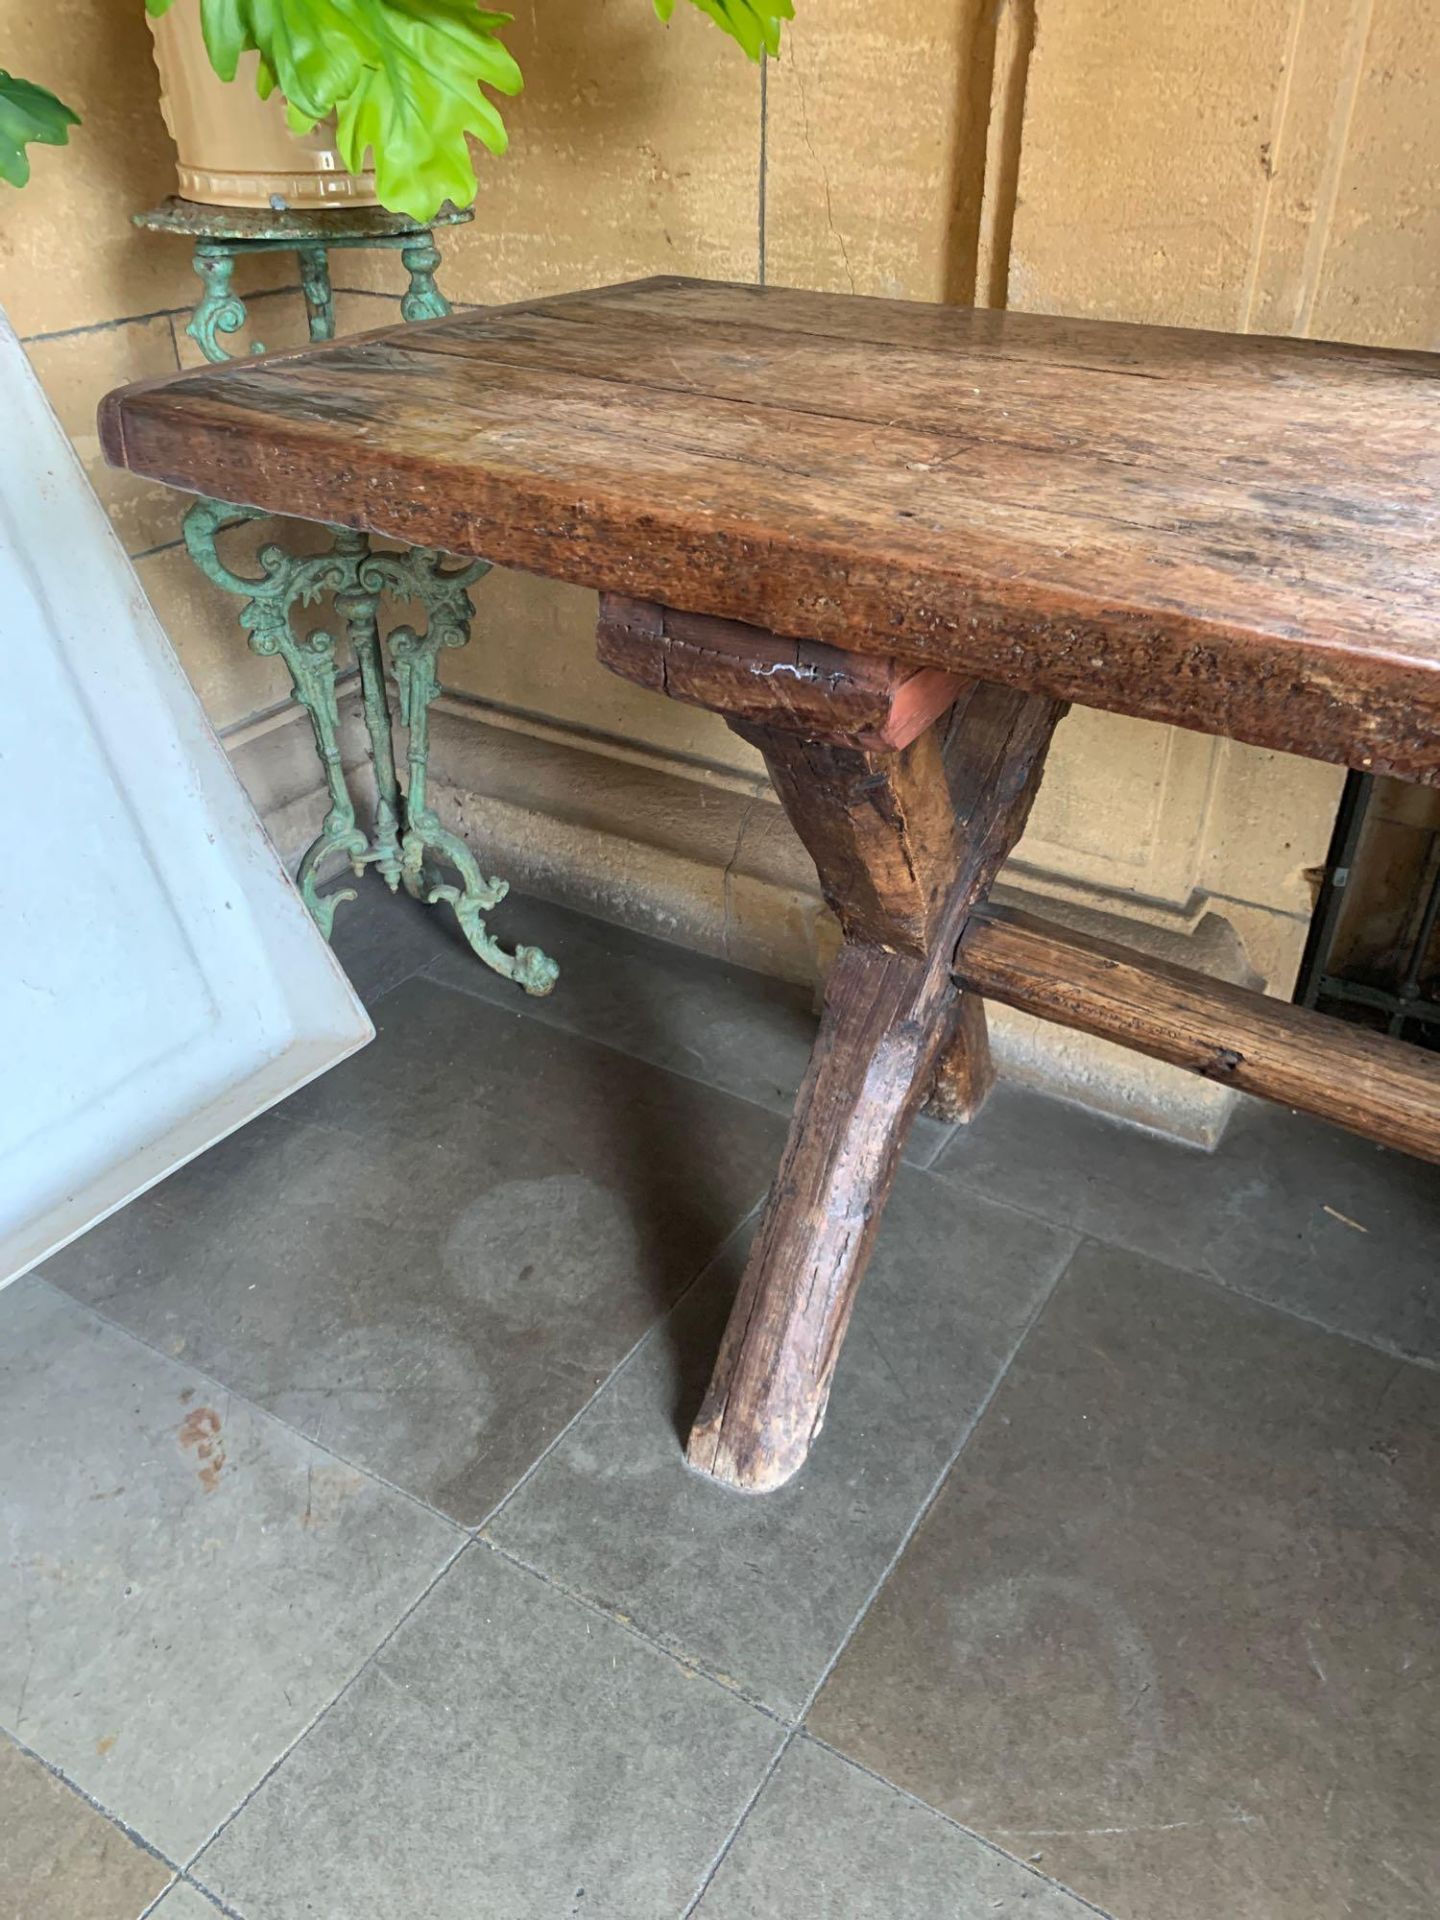 Rough Sawn Vintage Oak Hand Carved Table 220 X 64 X 76cm - Image 3 of 3